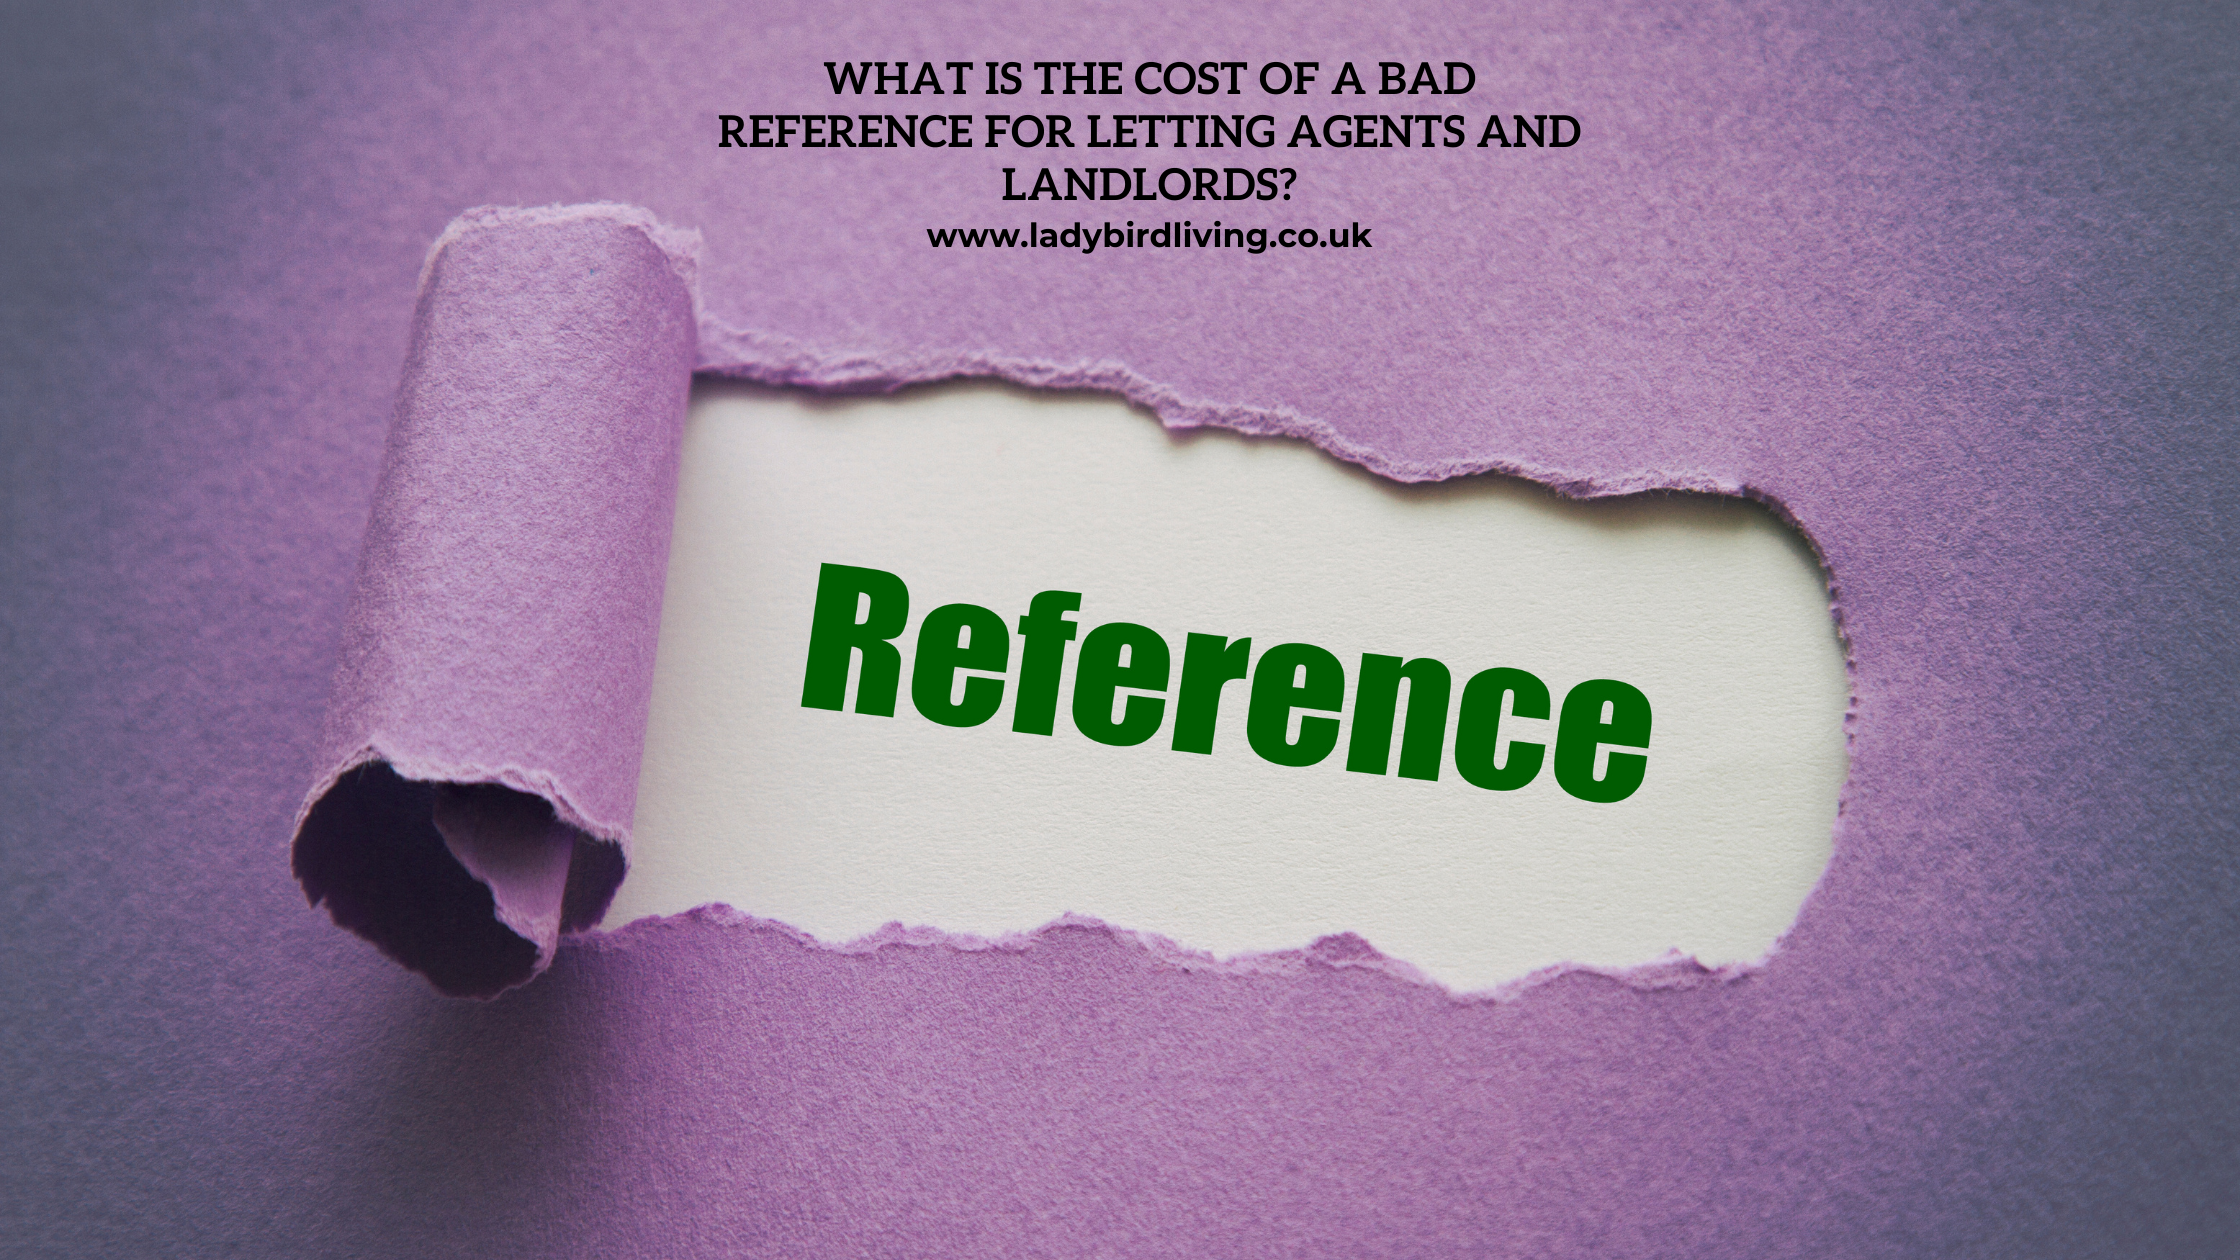 What is the cost of a bad reference for letting agents and landlords